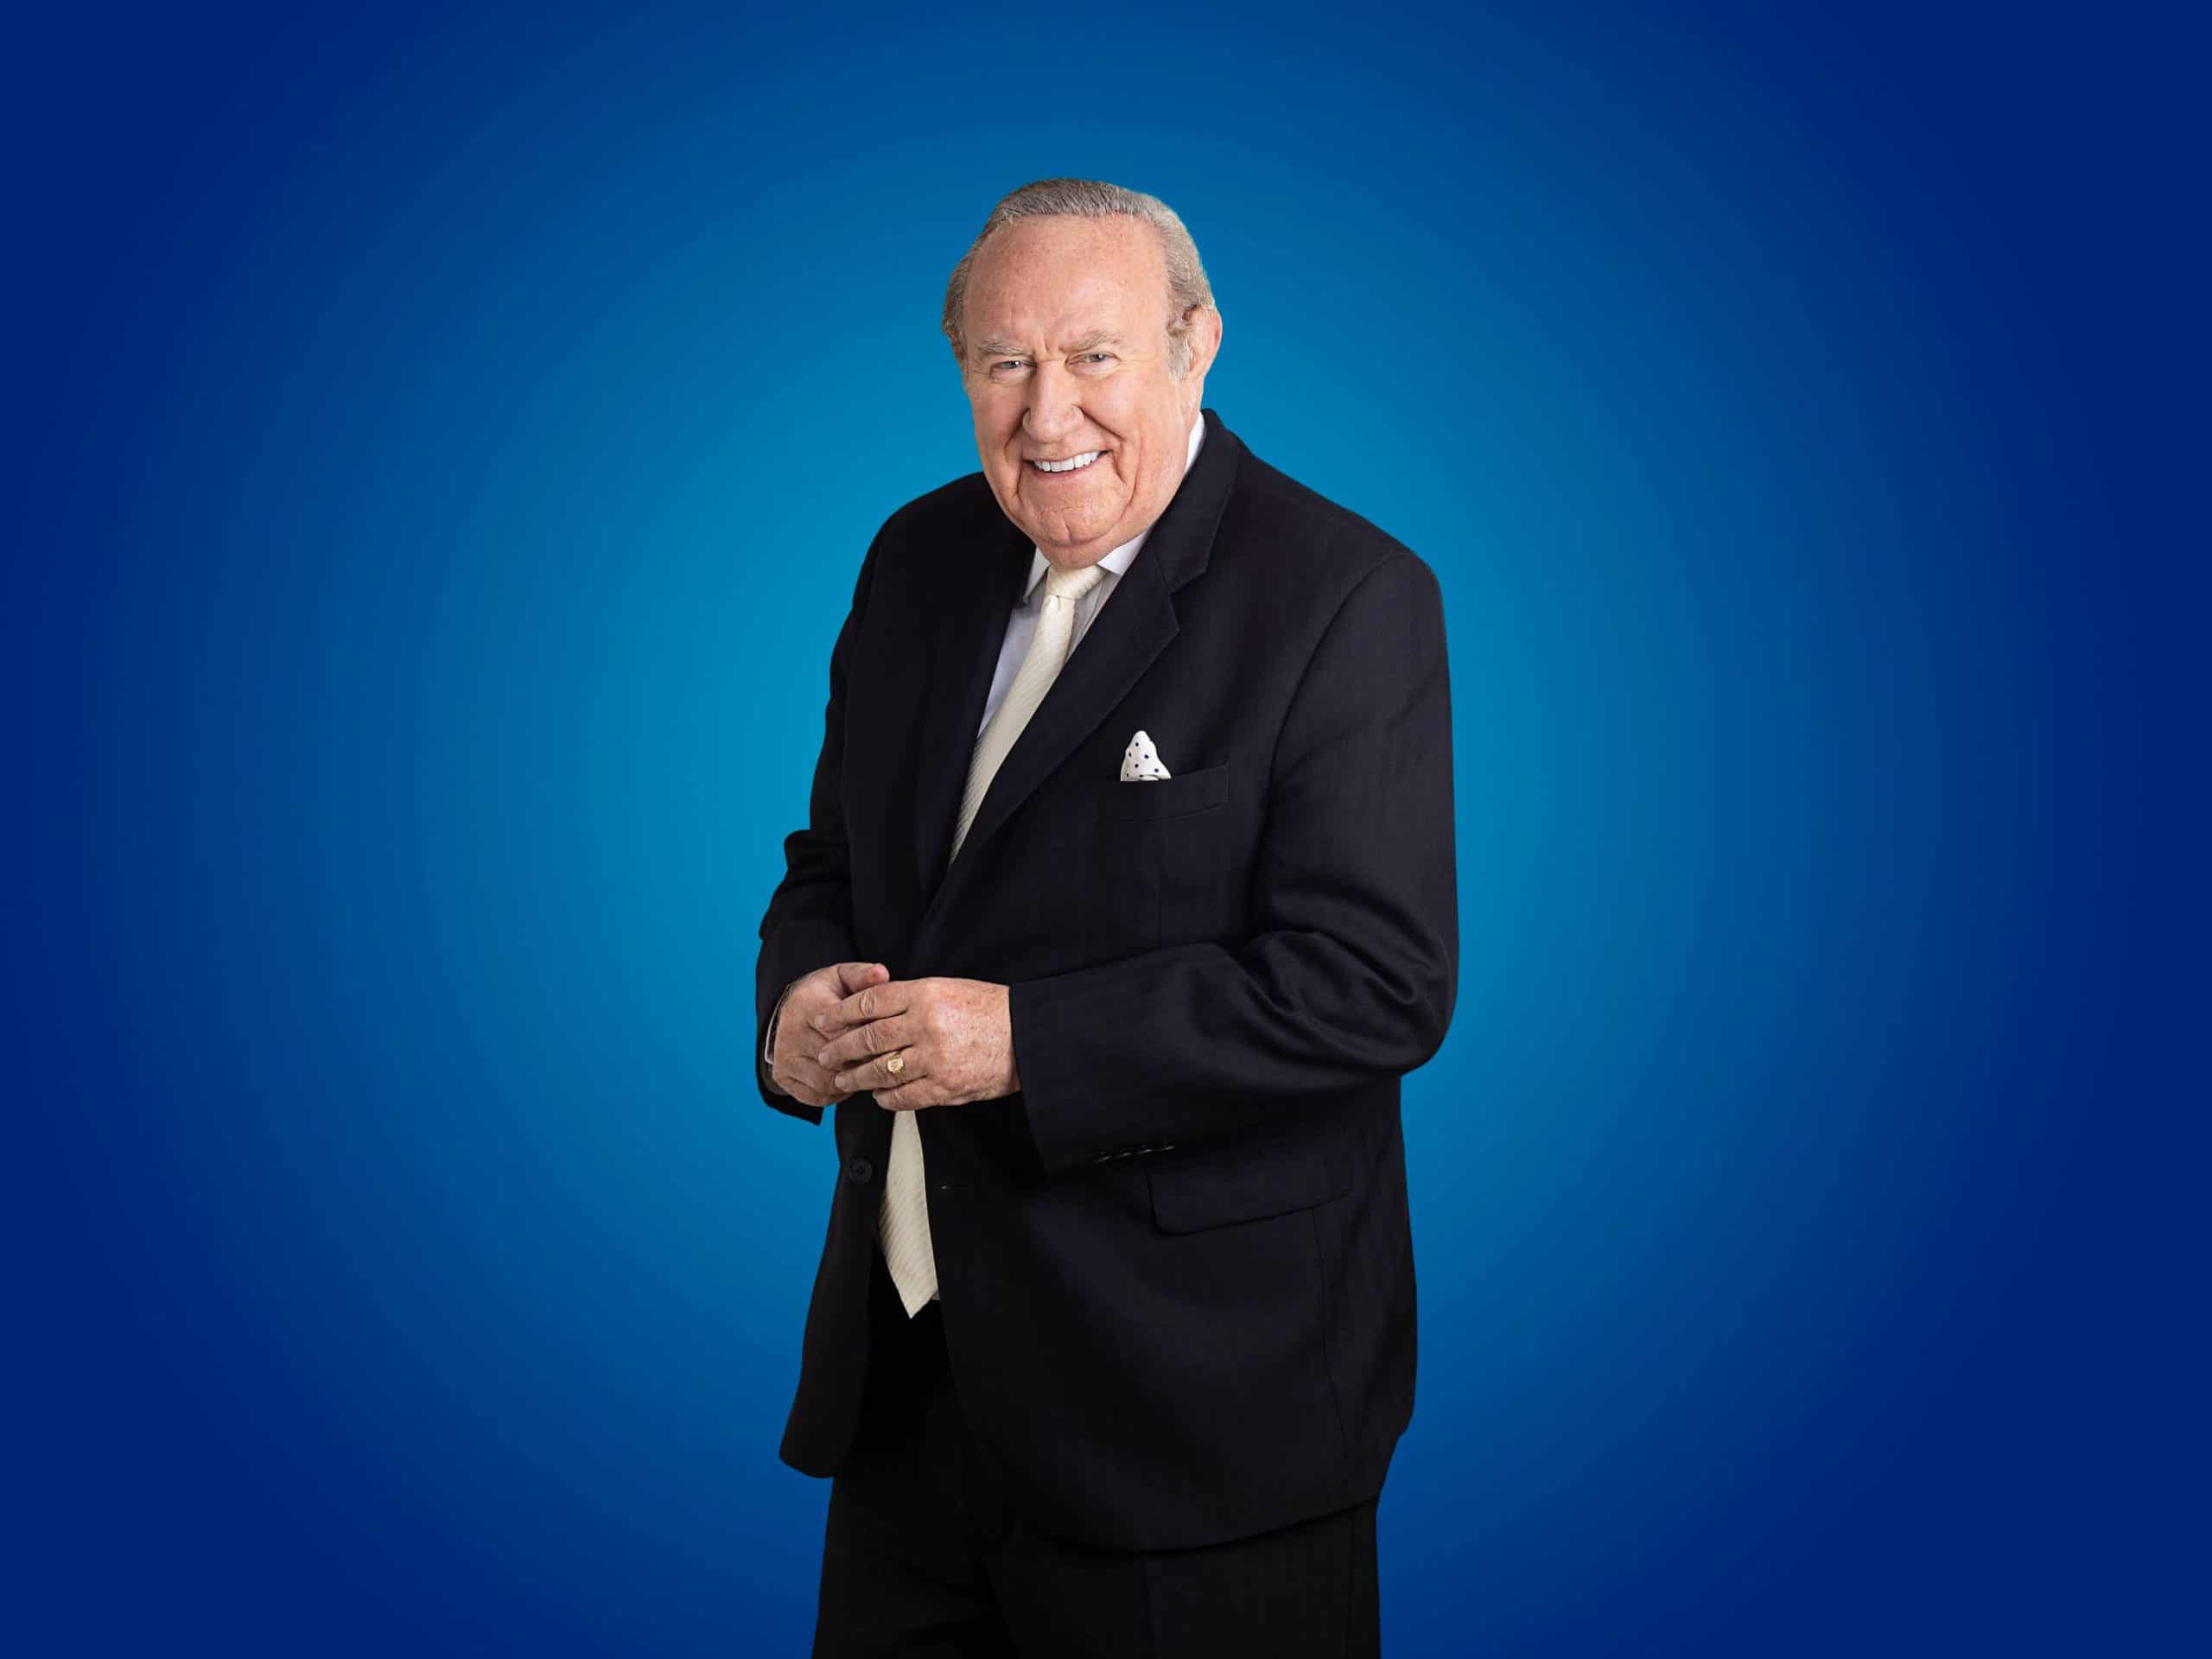 He’s back: Andrew Neil unveils new Sunday show